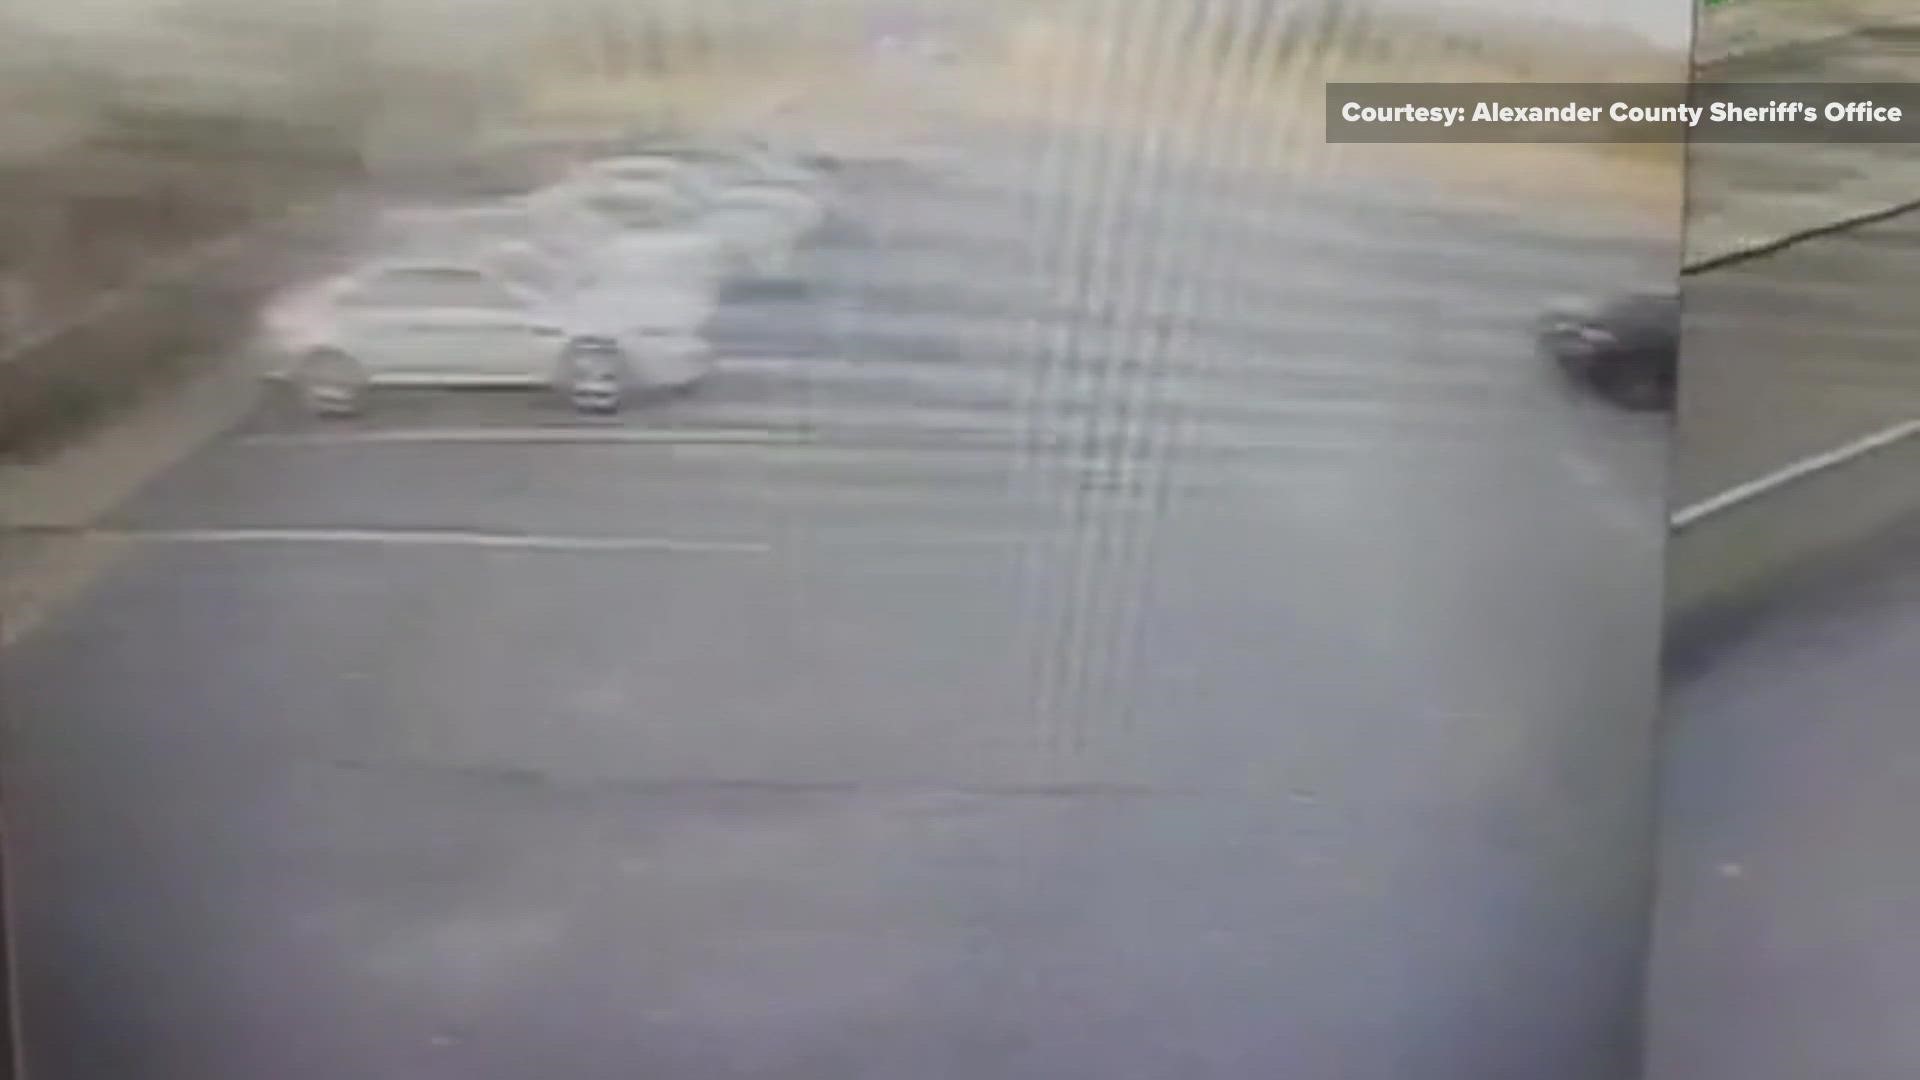 Video of high speed chase ending with crash at Alexander County Sheriff's Office. (Courtesy: Alexander County Sheriff's Office)